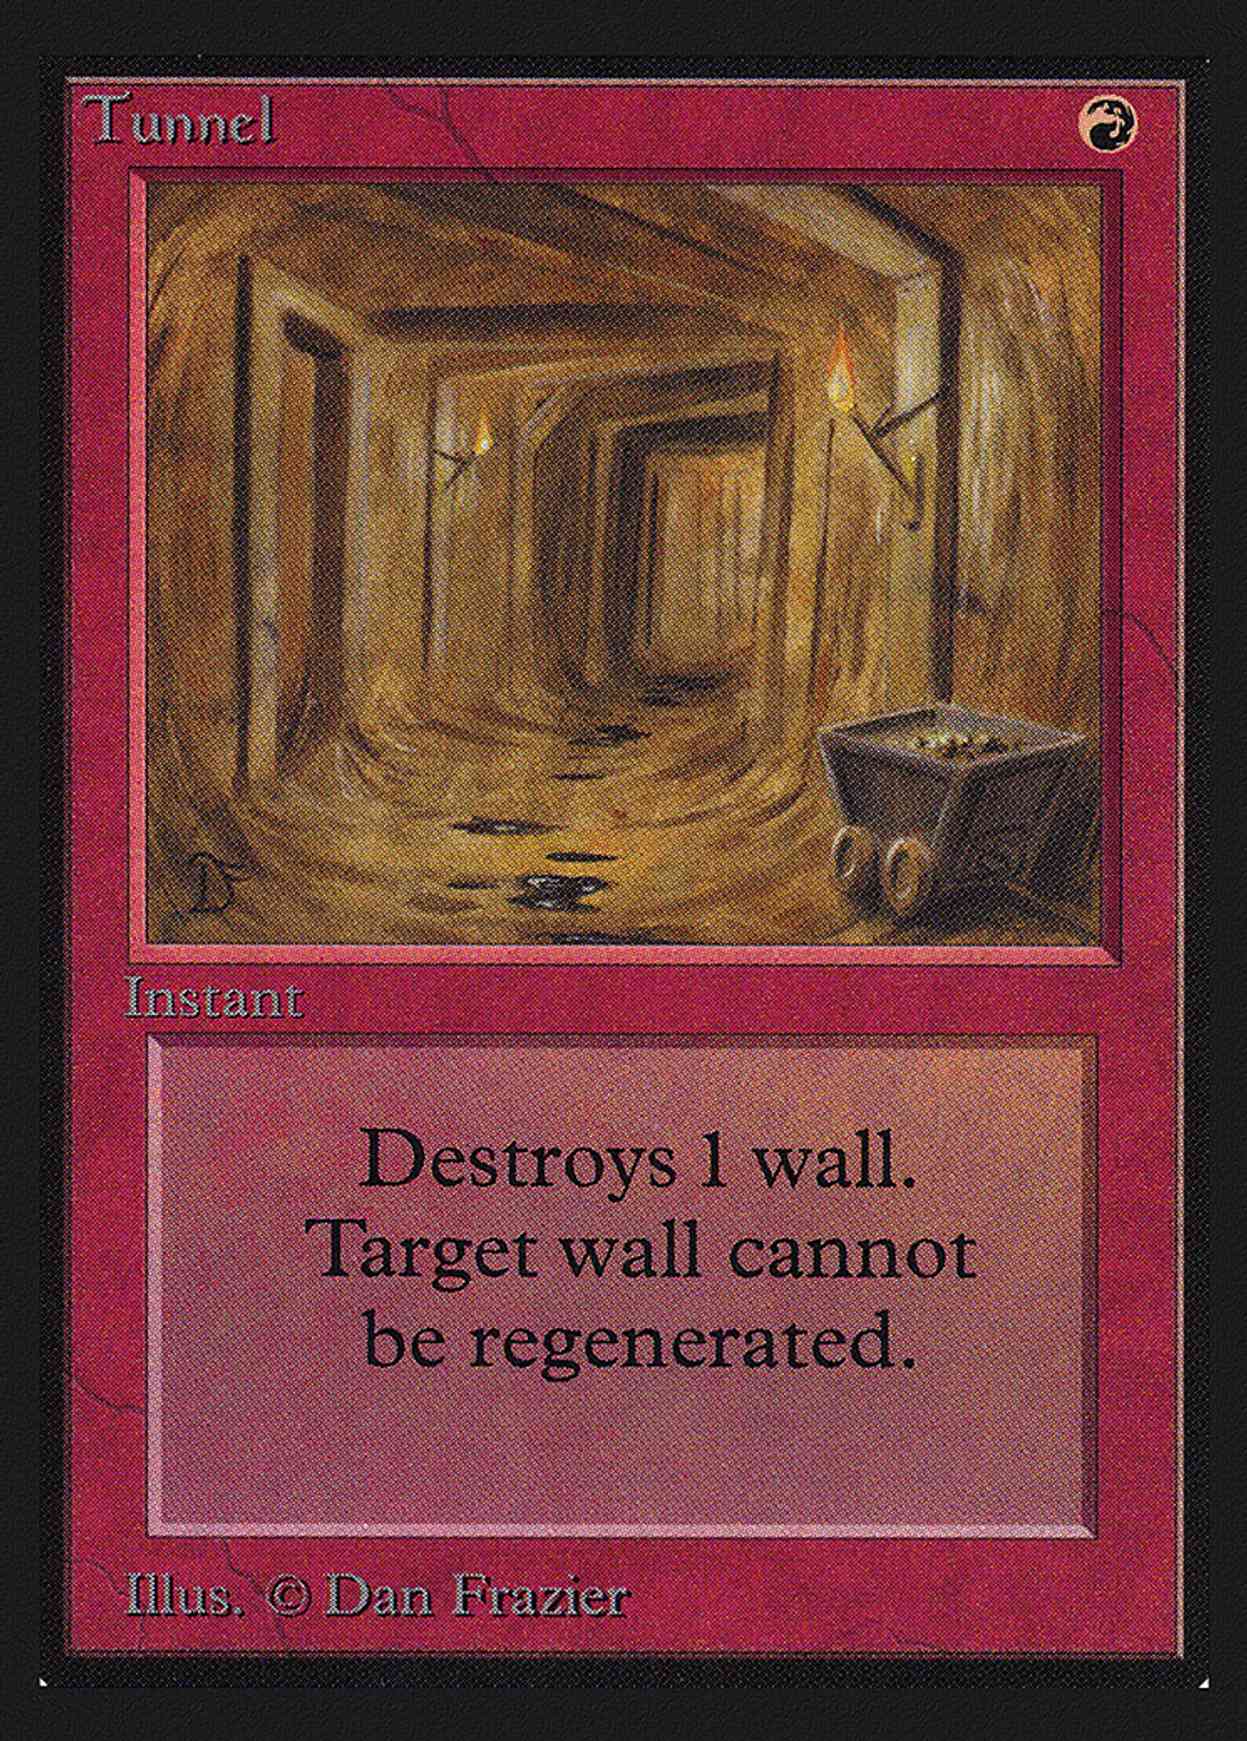 Tunnel (CE) magic card front